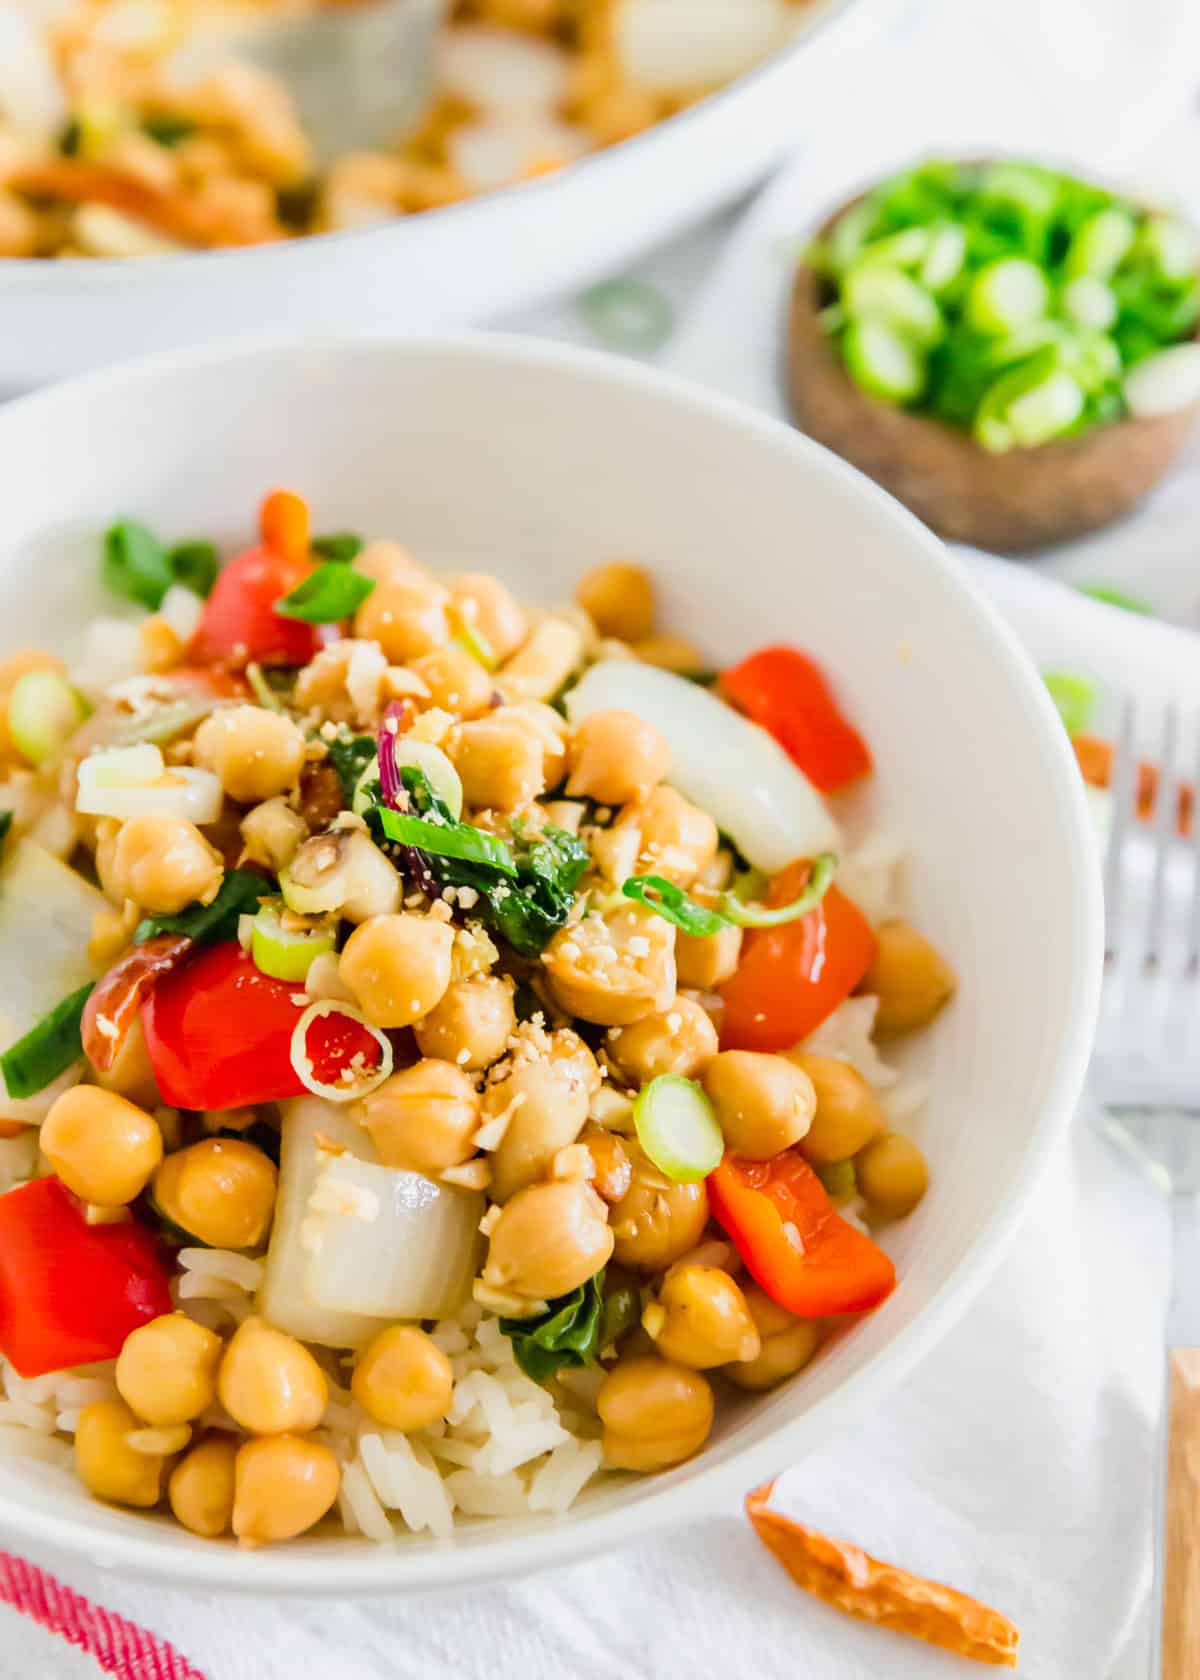 Kung Pao Chickpeas - Chinese Takeout with A Vegan Twist!